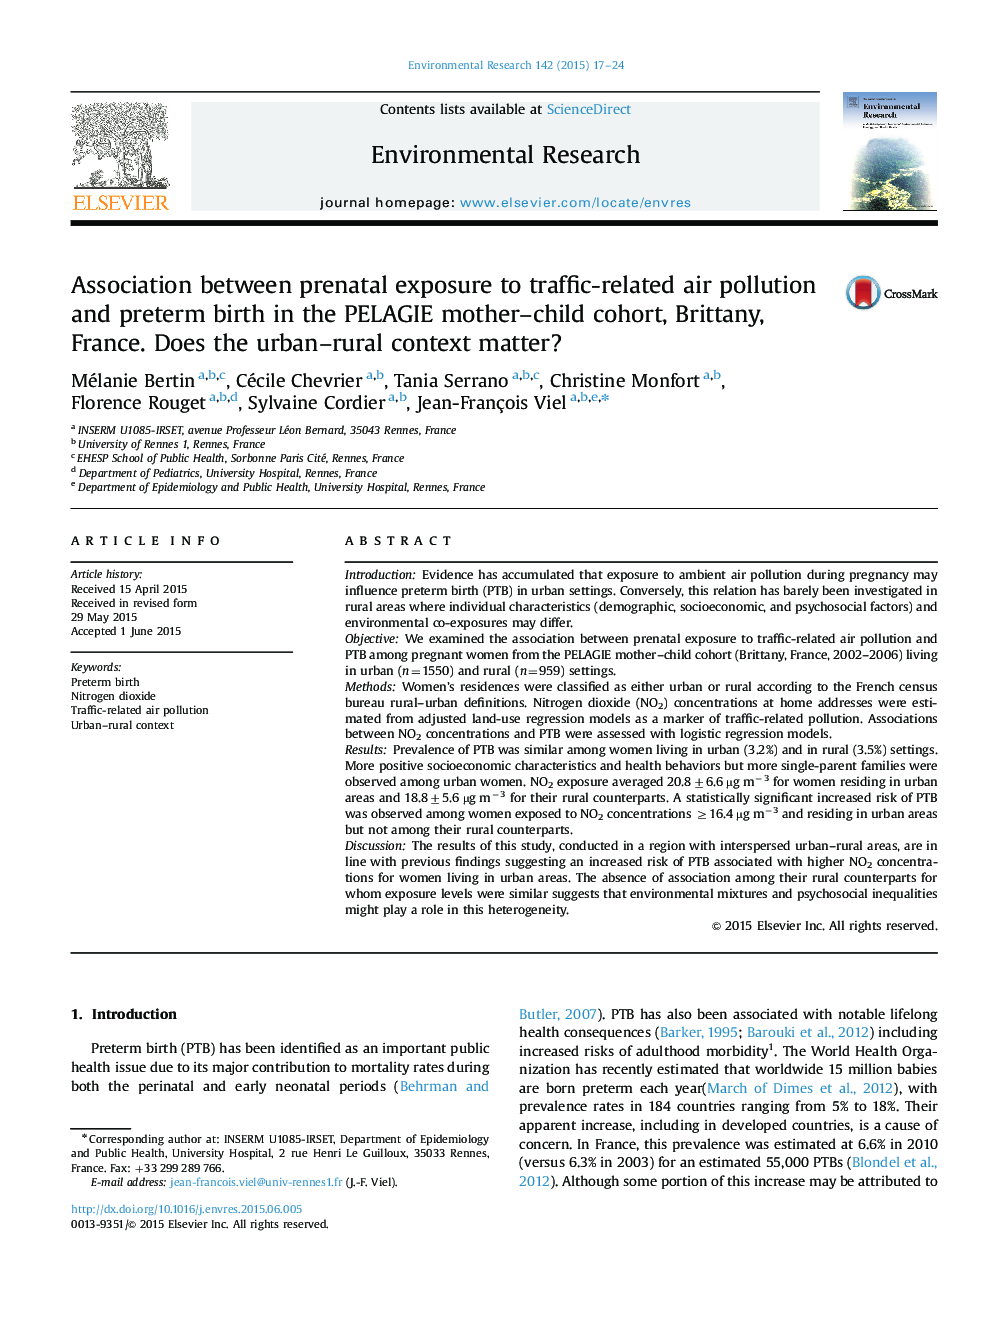 Association between prenatal exposure to traffic-related air pollution and preterm birth in the PELAGIE mother-child cohort, Brittany, France. Does the urban-rural context matter?